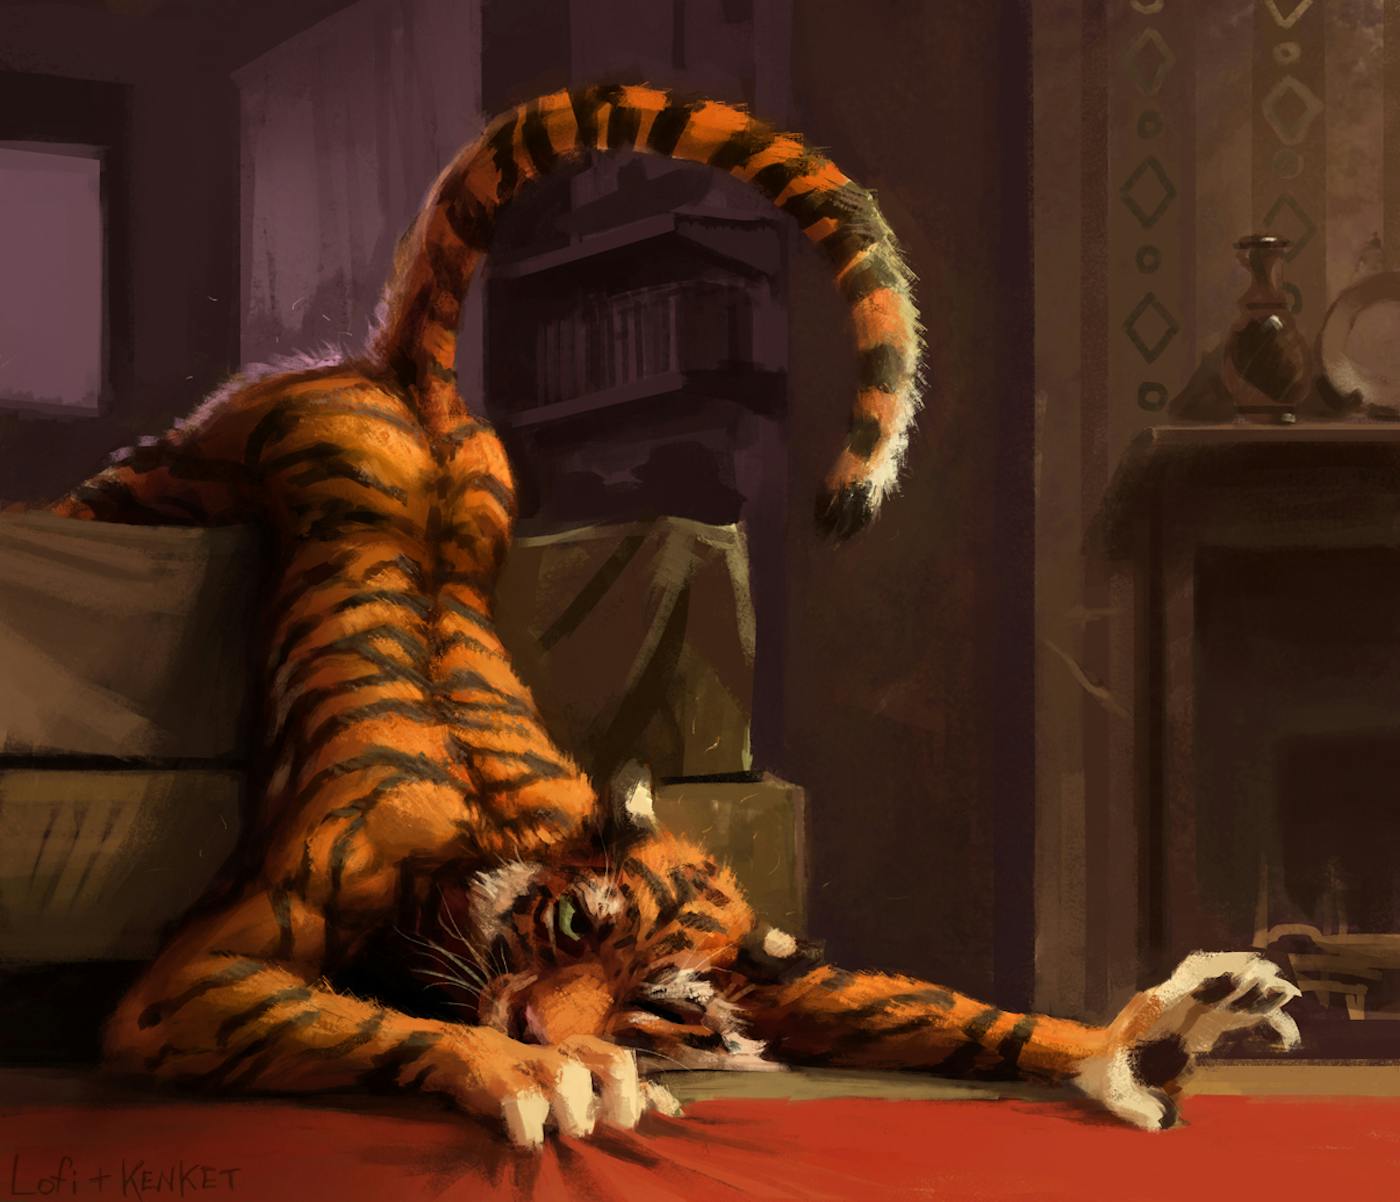 Furry Tiger - Furries Who Yiff Over the Internet Are Advanced Sexual ...